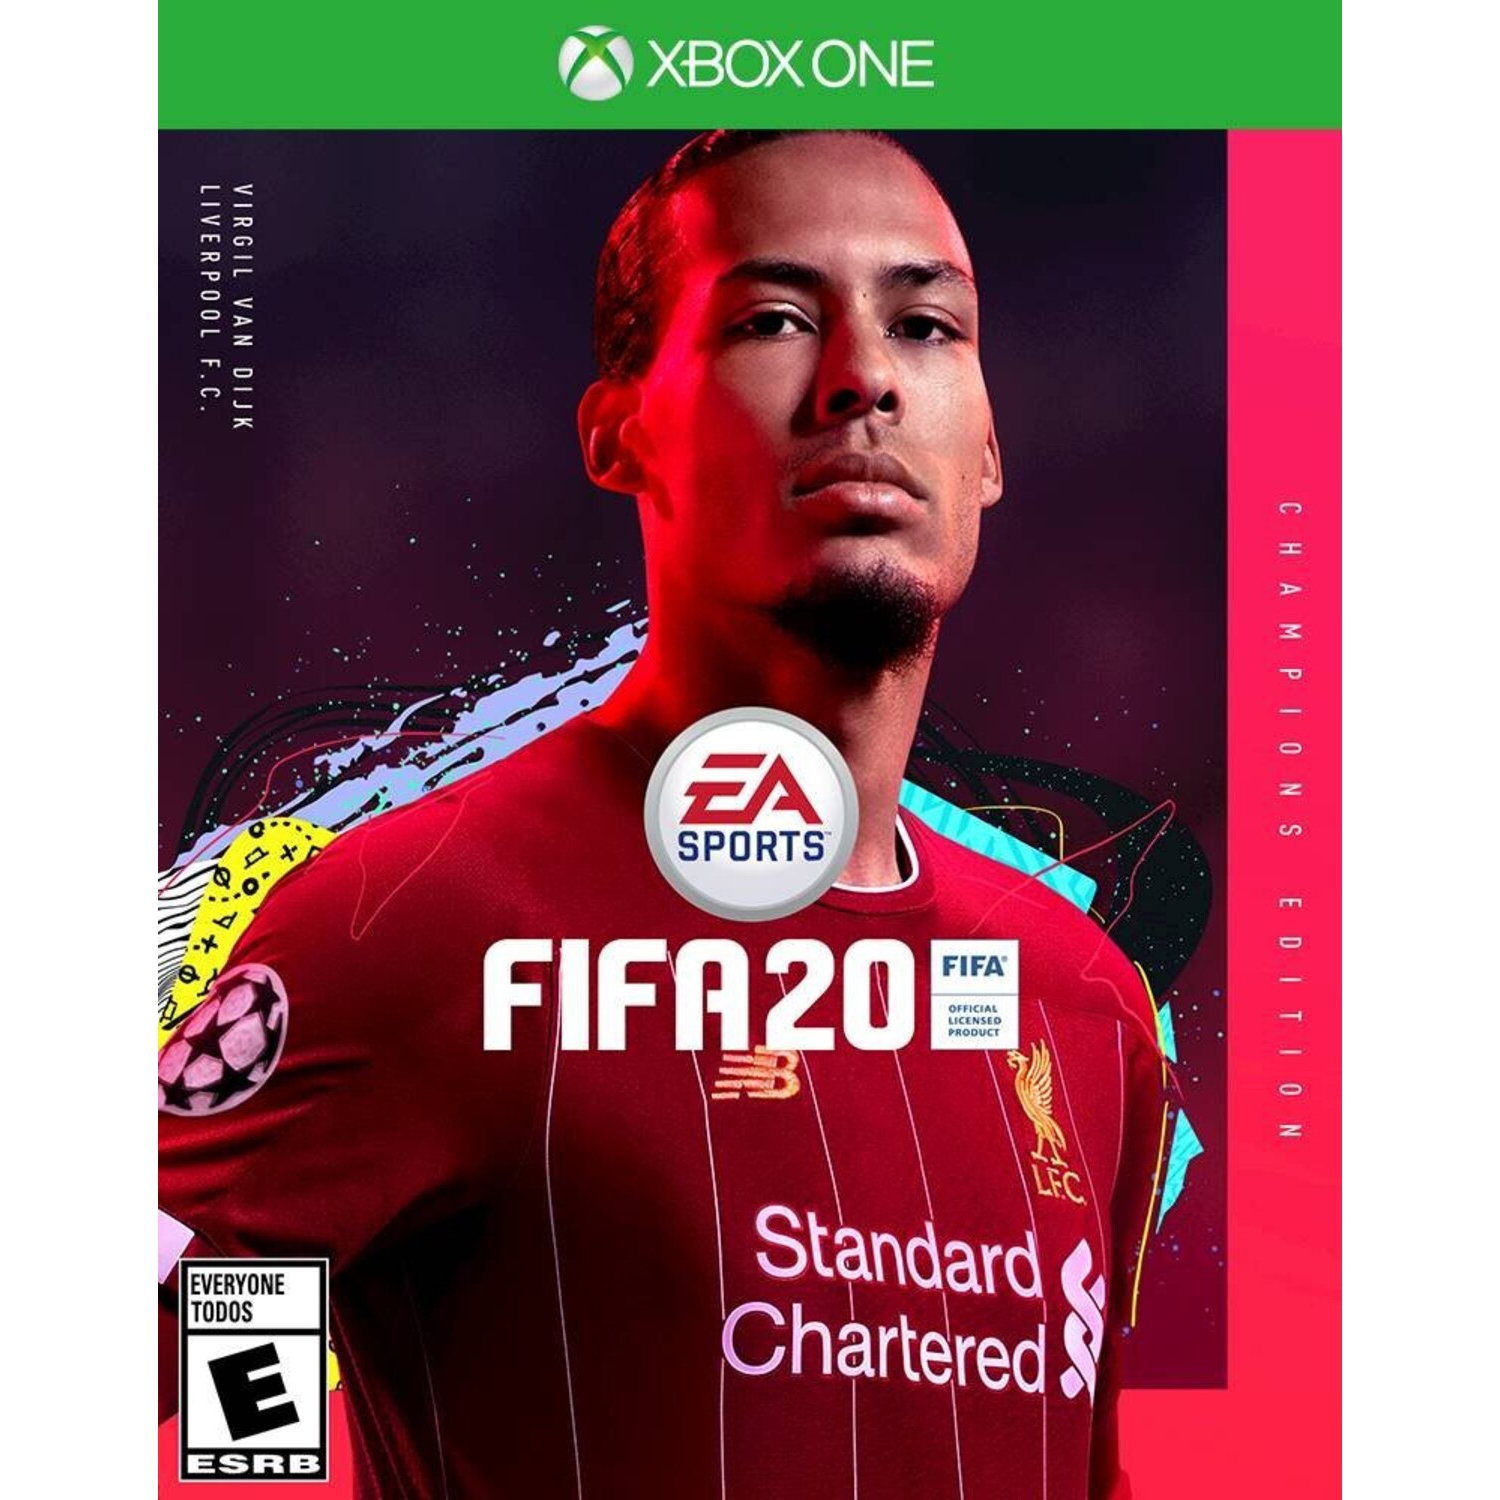 FIFA 20 Champions Edition for Xbox One [VIDEOGAMES] Xbox One